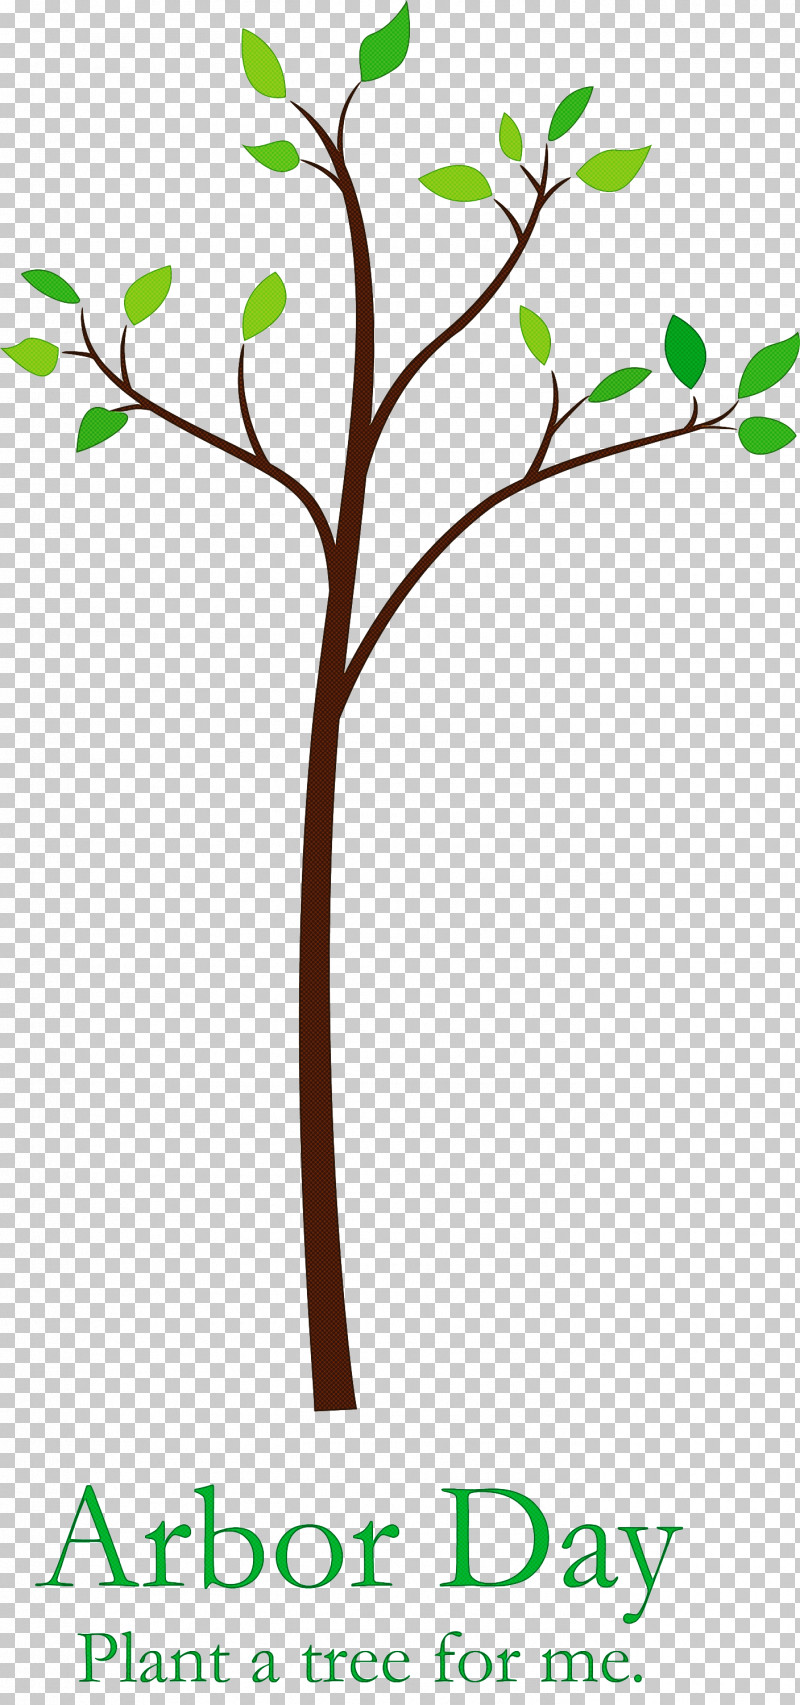 Arbor Day Tree Green PNG, Clipart, Arbor Day, Branch, Flower, Green, Leaf Free PNG Download